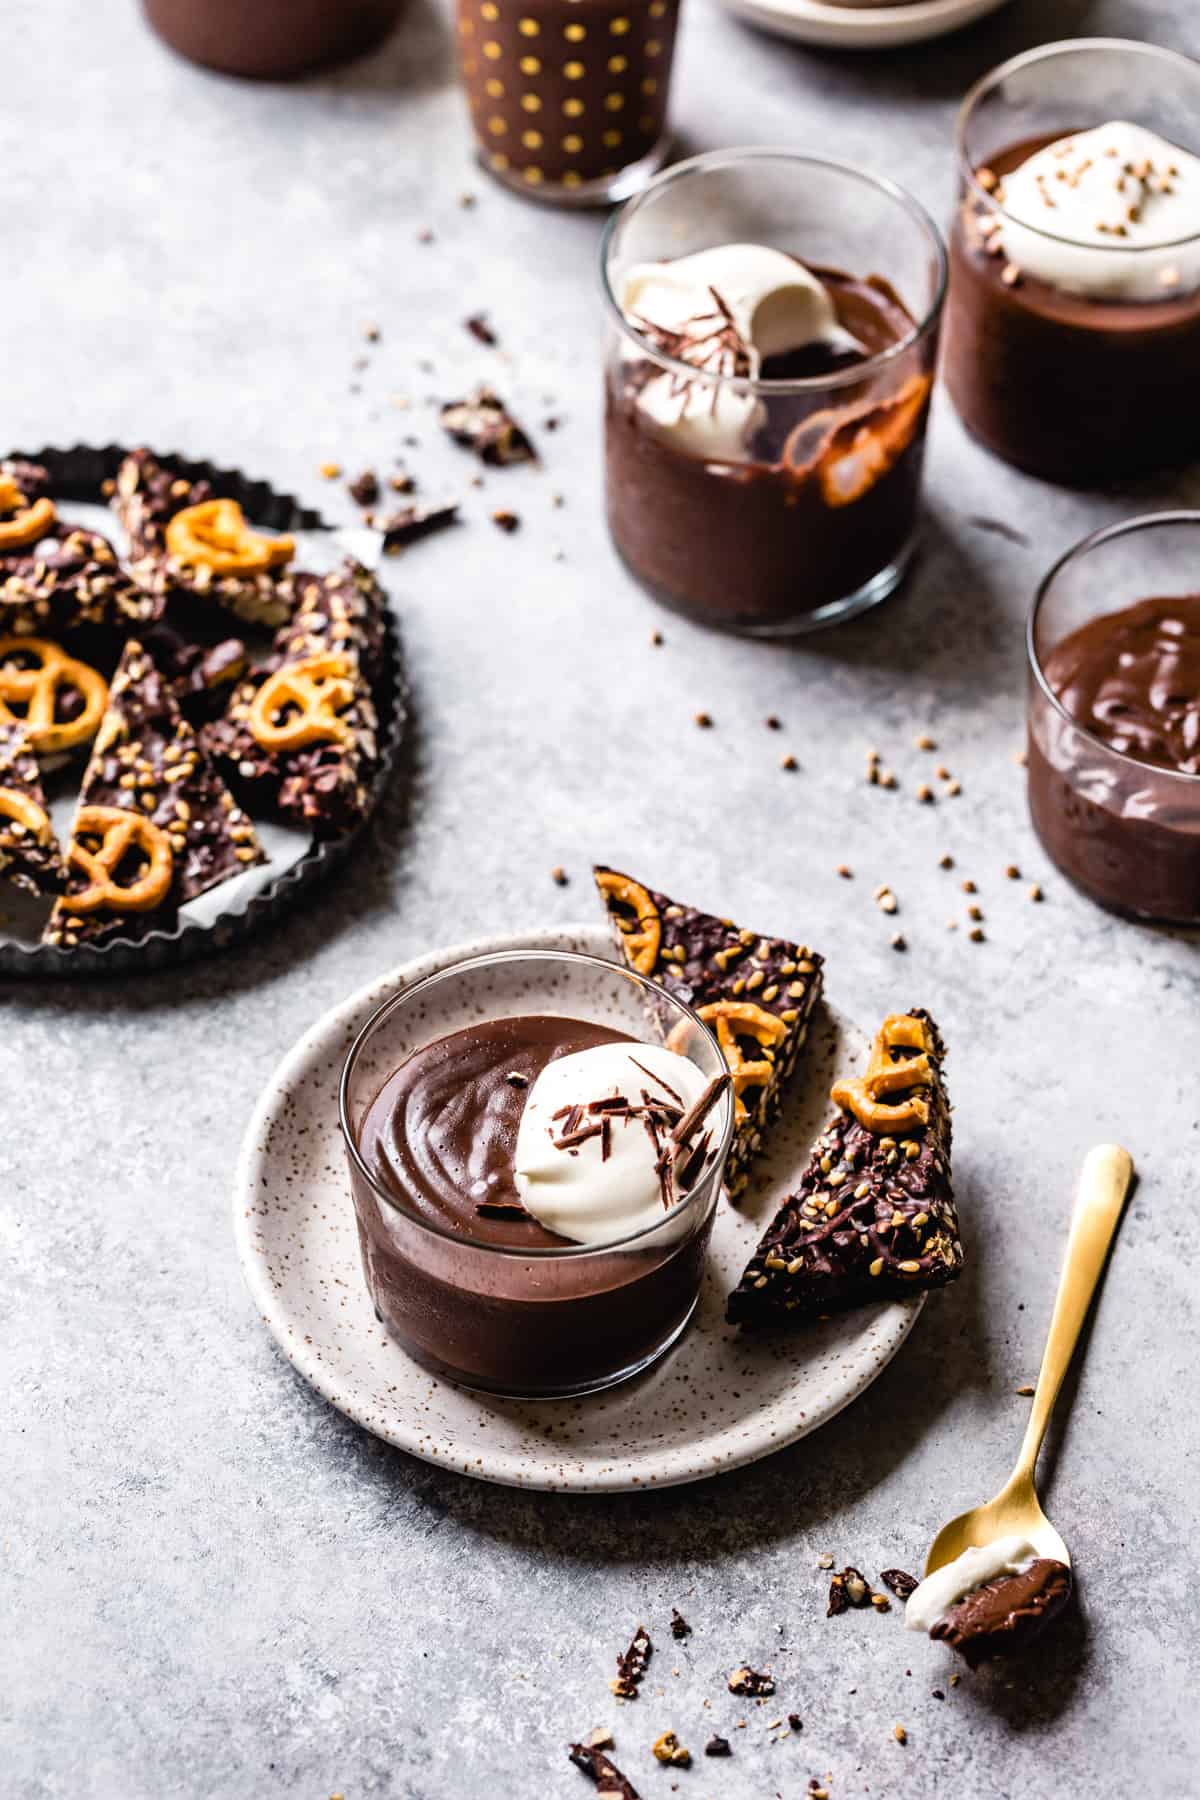  Chocolate Pudding in glass on plate 